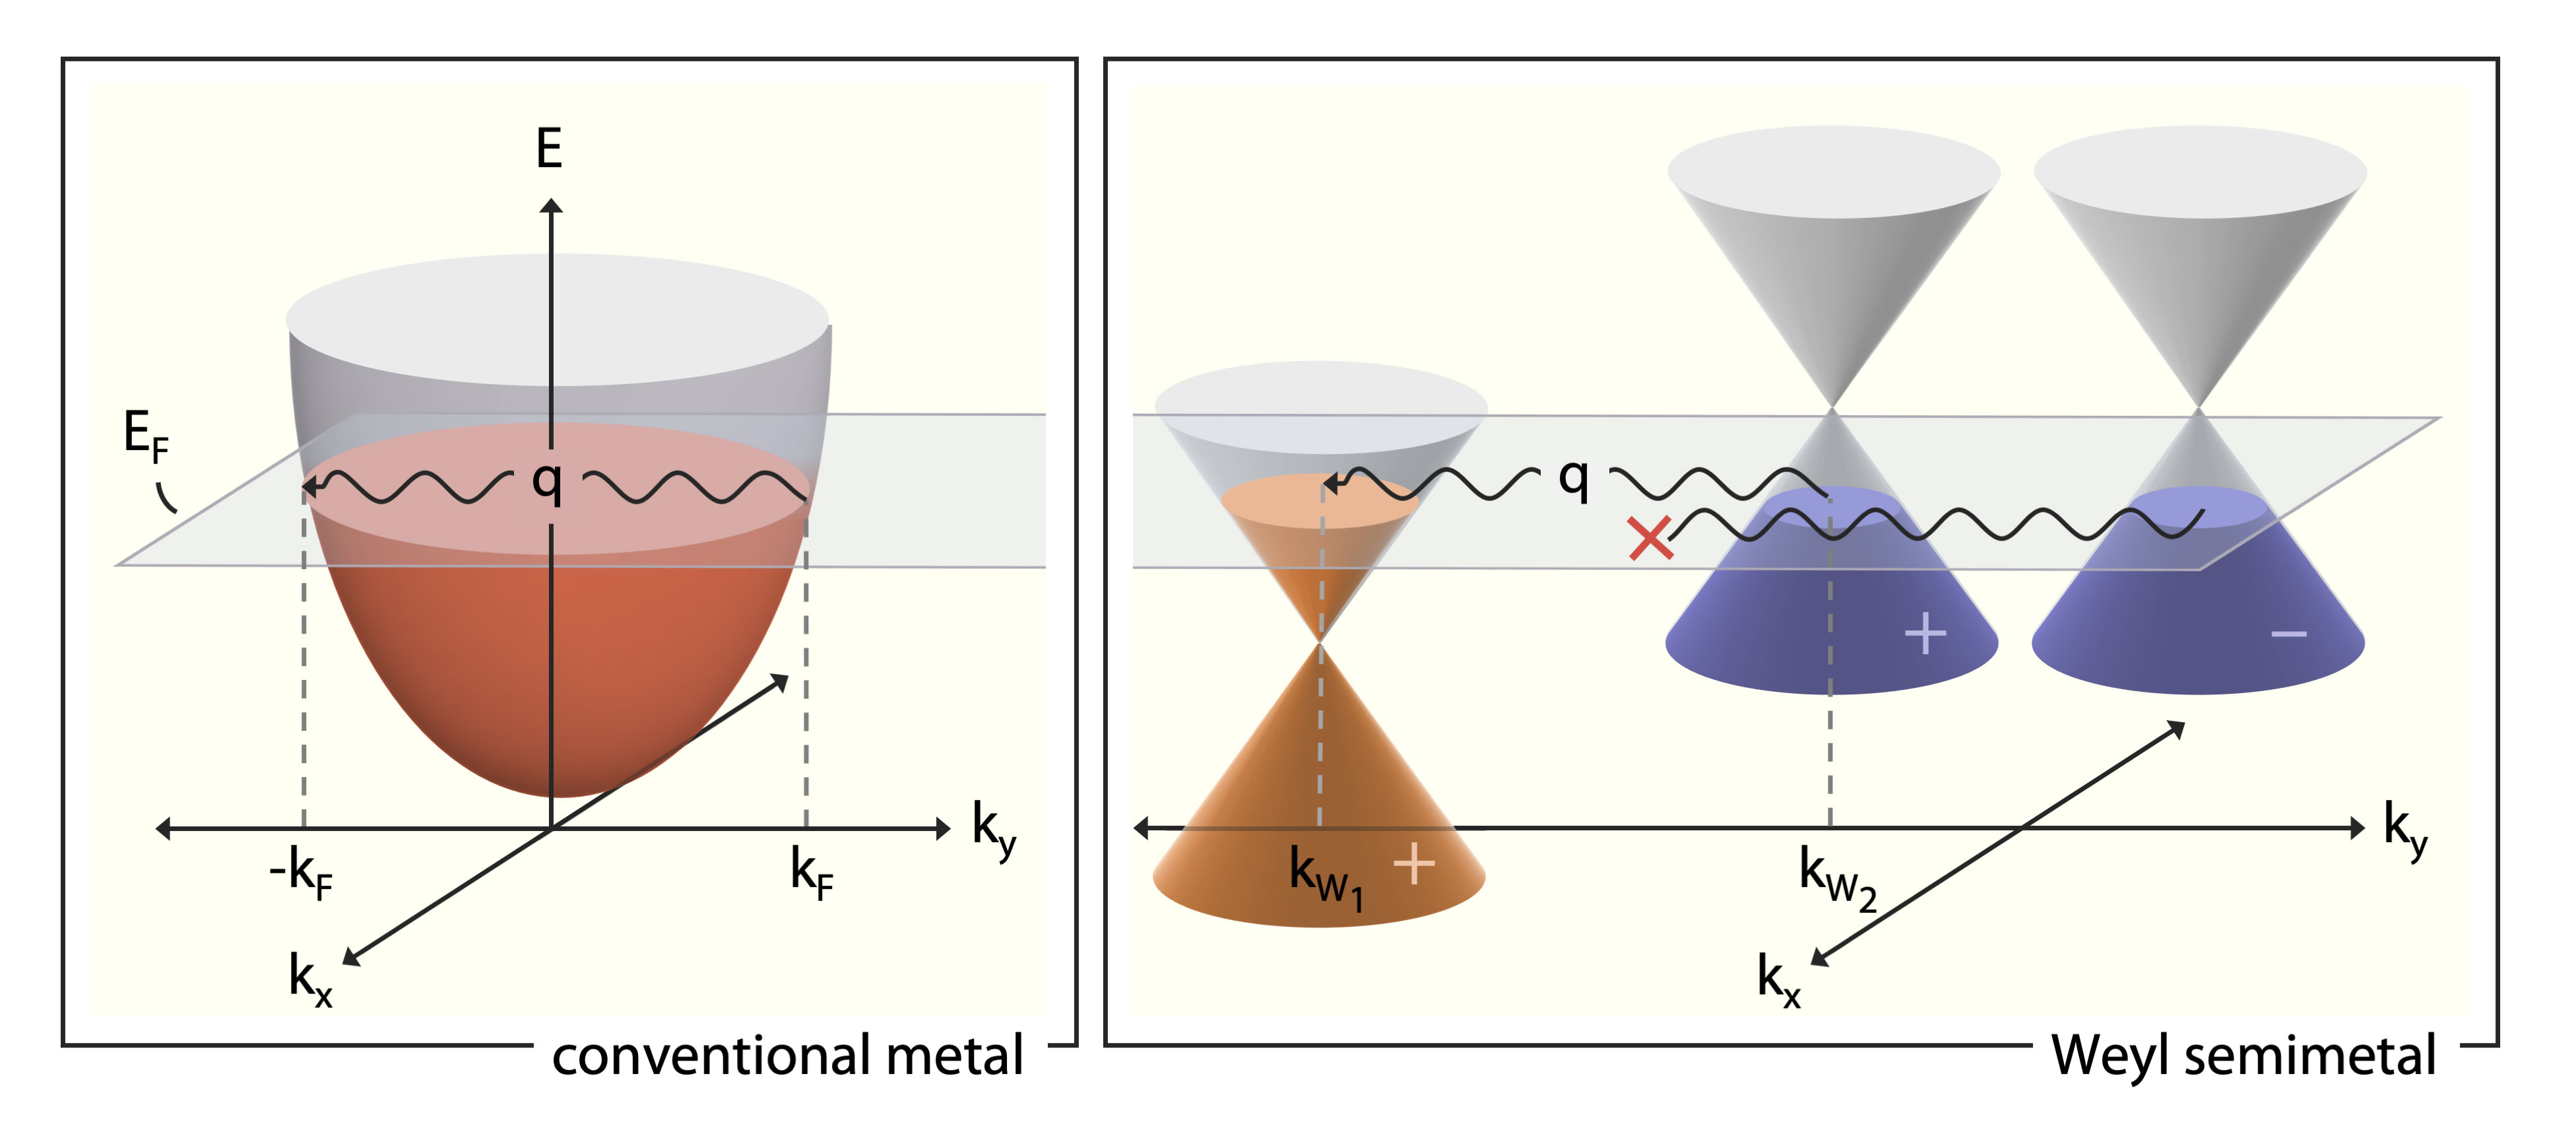 Engineering topological states in atom-based semiconductor quantum